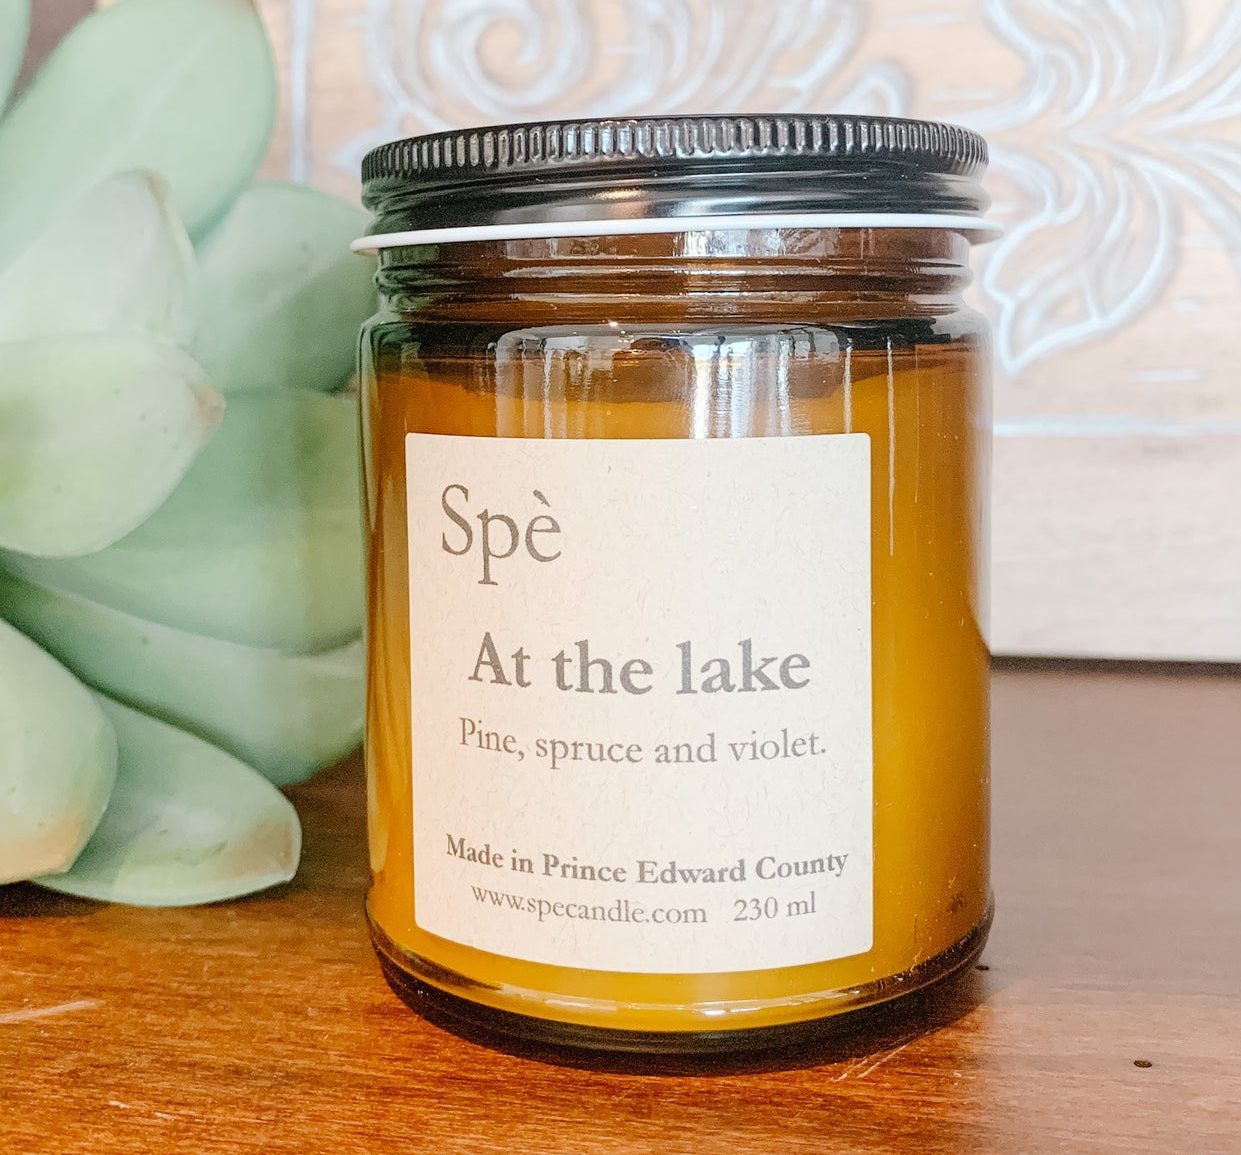 Summer candle, pine, spruce, violet scent, locally made candle, prince edward county, ontario made